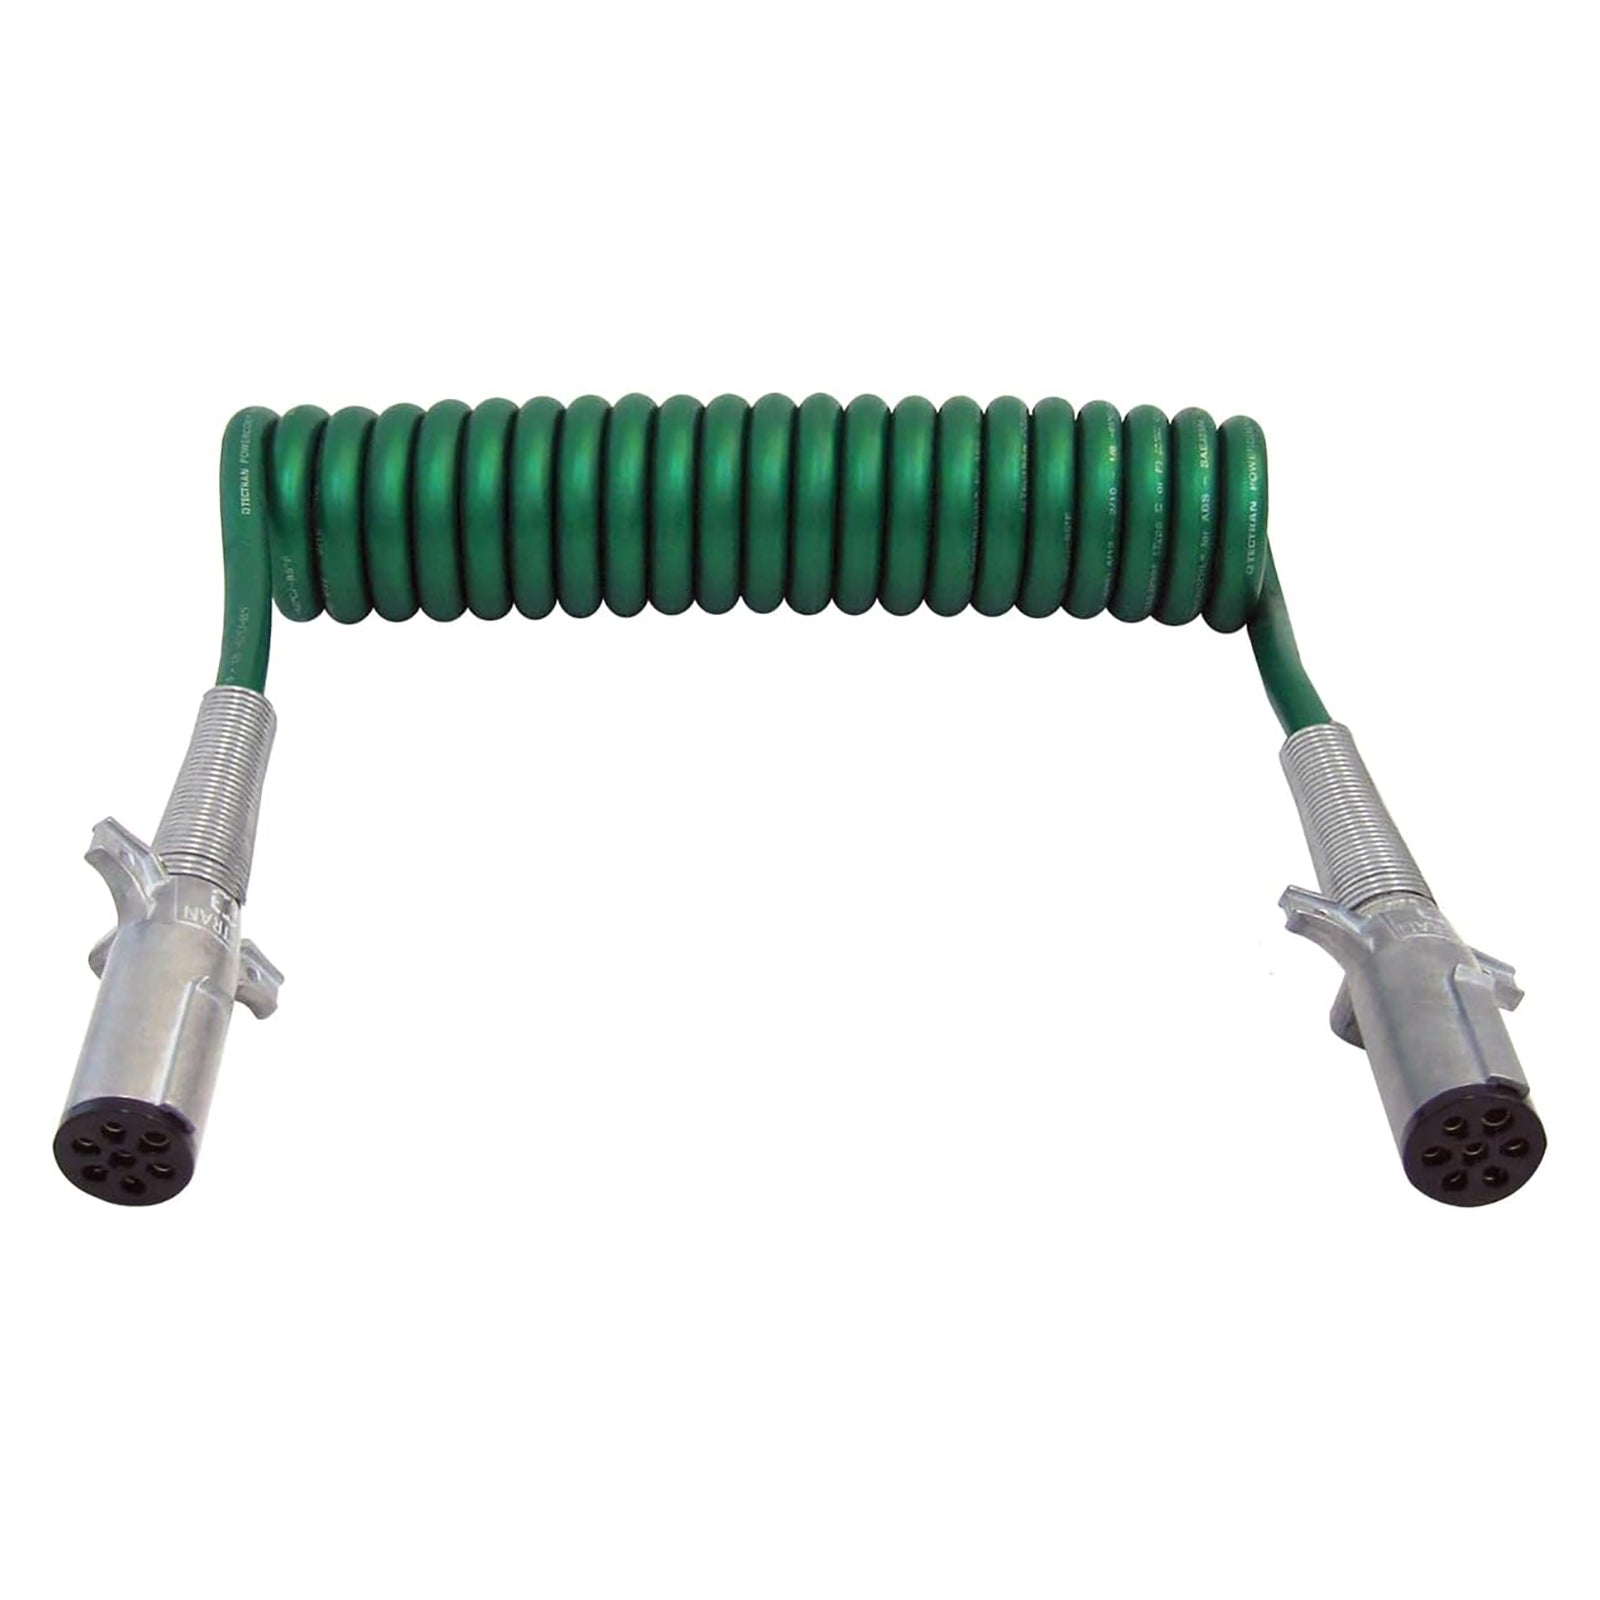 Tectran 7-Way ABS Duty Powercoil | 12" Trailer Lead | Die-cast Plugs w/ Spring Guards | 15' Length x 12" Tractor Lead